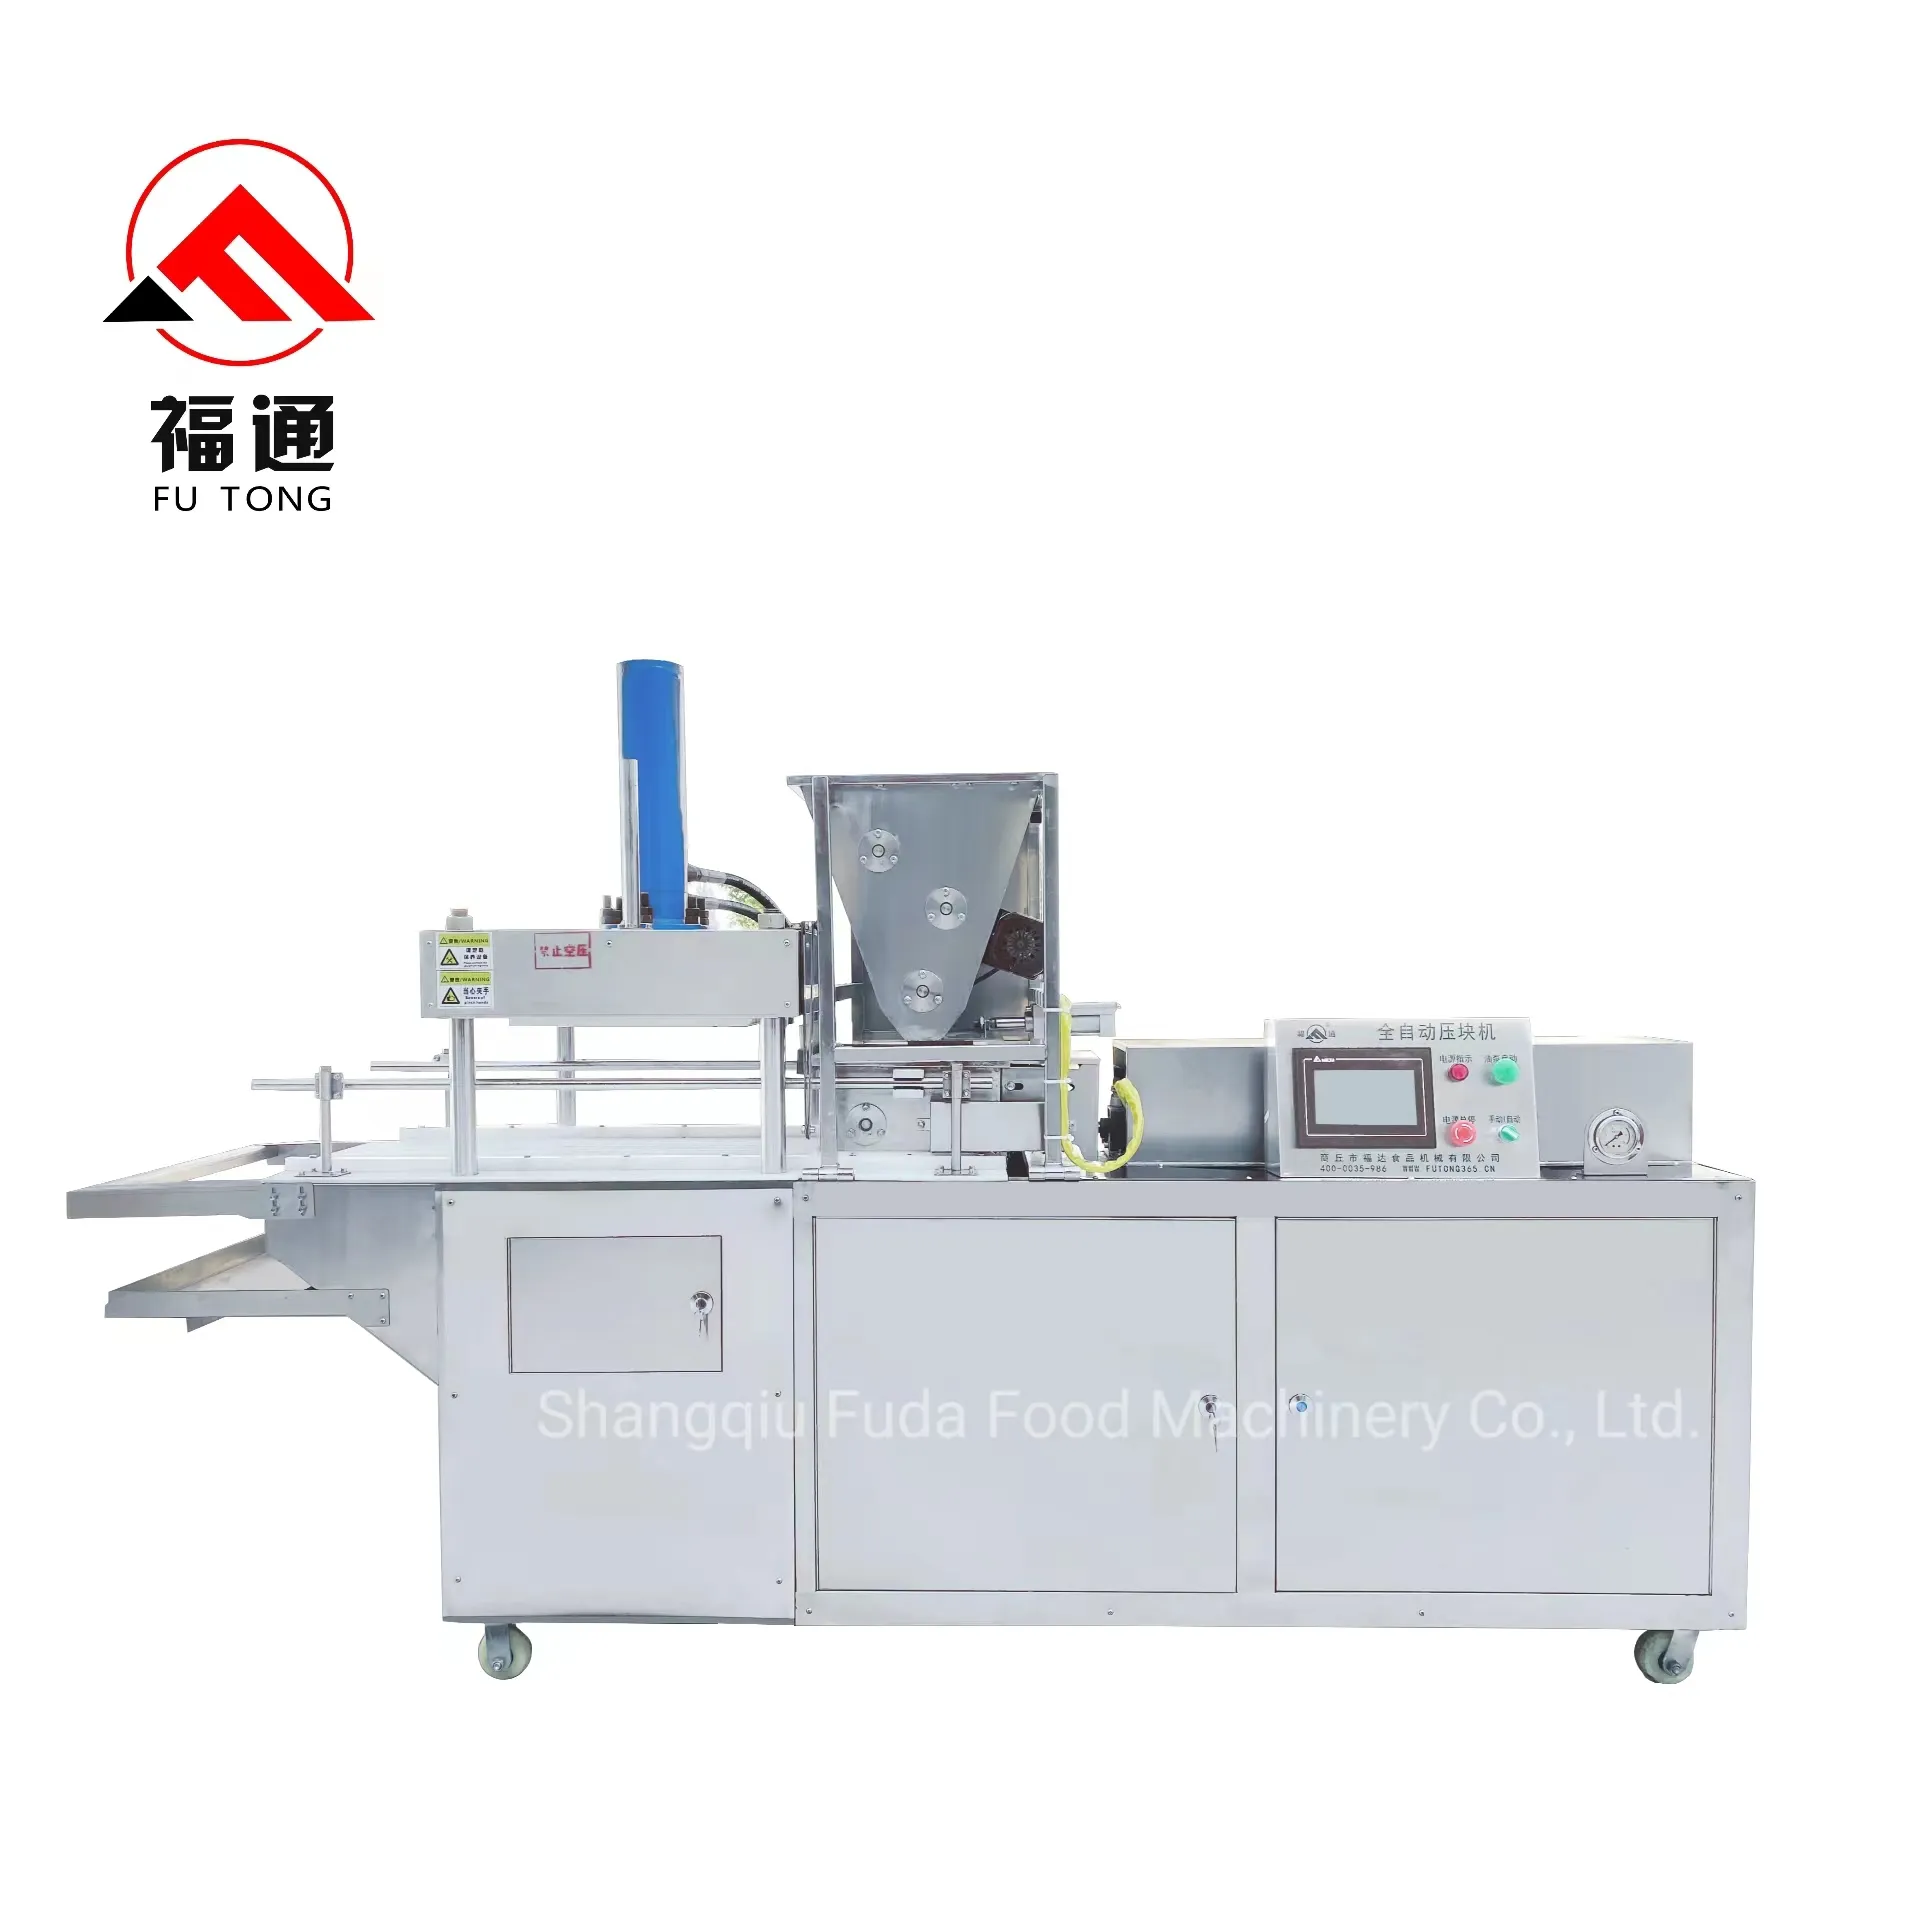 FT dehydrated vegetables meat stock cube press machine bouillon cube Making Machine